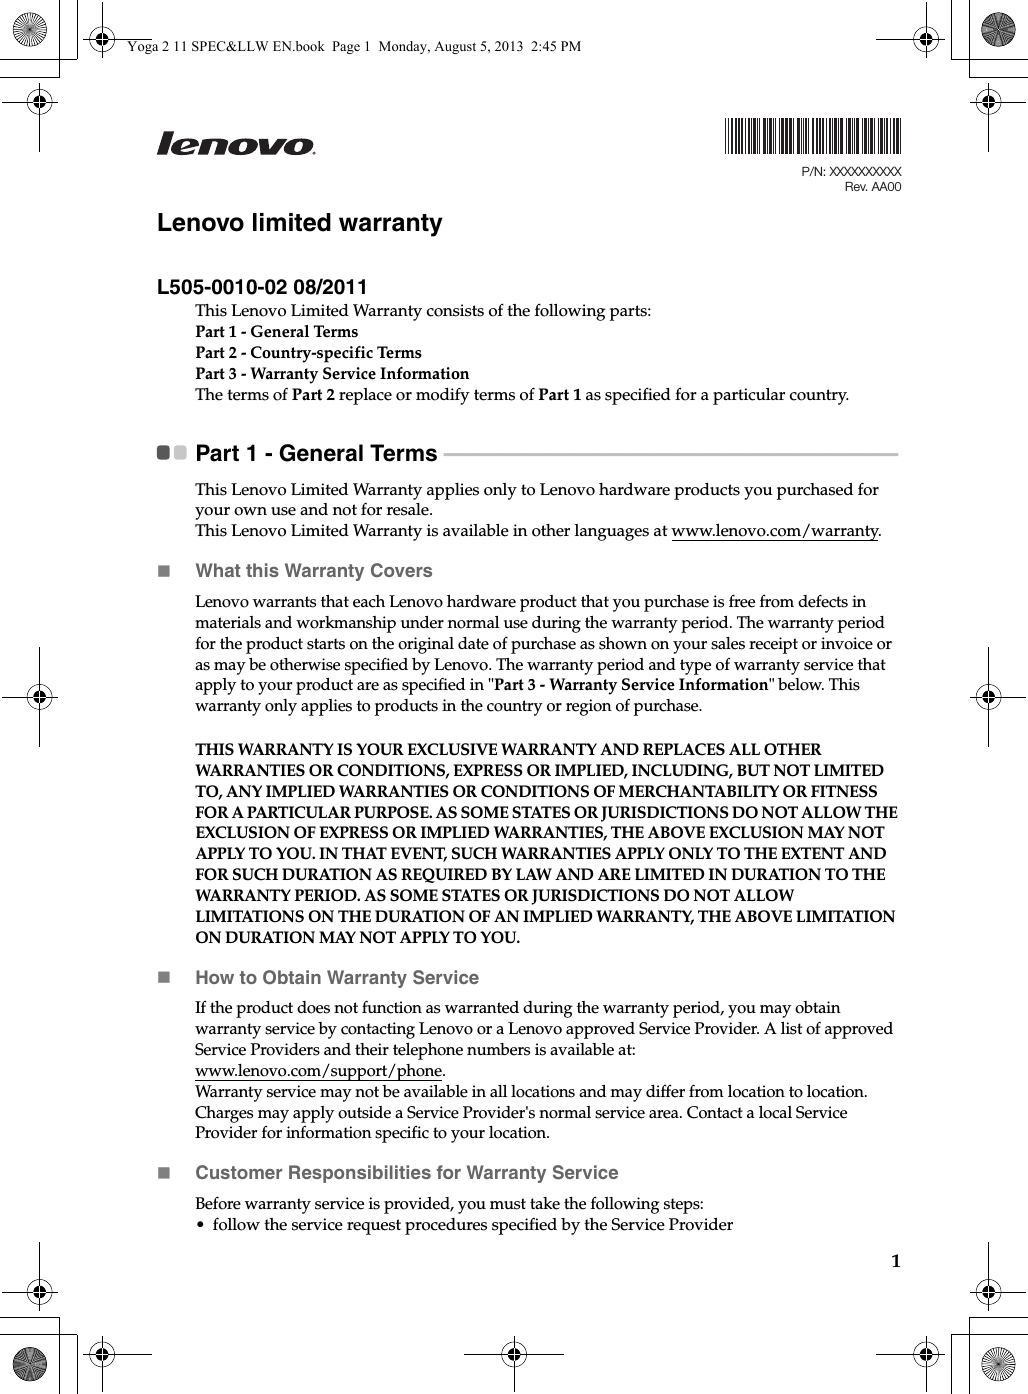 1Lenovo limited warrantyL505-0010-02 08/2011This Lenovo Limited Warranty consists of the following parts:Part 1 - General TermsPart 2 - Country-specific Terms Part 3 - Warranty Service Information The terms of Part 2 replace or modify terms of Part 1 as specified for a particular country.Part 1 - General Terms  - - - - - - - - - - - - - - - - - - - - - - - - - - - - - - - - - - - - - - - - - - - - - - - - - - - - - - - - - - - - - - - - - - - - - - - - - - - - - - - - - - - - - - - - - - - - - -This Lenovo Limited Warranty applies only to Lenovo hardware products you purchased for your own use and not for resale.This Lenovo Limited Warranty is available in other languages at www.lenovo.com/warranty.What this Warranty CoversLenovo warrants that each Lenovo hardware product that you purchase is free from defects in materials and workmanship under normal use during the warranty period. The warranty period for the product starts on the original date of purchase as shown on your sales receipt or invoice or as may be otherwise specified by Lenovo. The warranty period and type of warranty service that apply to your product are as specified in &quot;Part 3 - Warranty Service Information&quot; below. This warranty only applies to products in the country or region of purchase.THIS WARRANTY IS YOUR EXCLUSIVE WARRANTY AND REPLACES ALL OTHER WARRANTIES OR CONDITIONS, EXPRESS OR IMPLIED, INCLUDING, BUT NOT LIMITED TO, ANY IMPLIED WARRANTIES OR CONDITIONS OF MERCHANTABILITY OR FITNESS FOR A PARTICULAR PURPOSE. AS SOME STATES OR JURISDICTIONS DO NOT ALLOW THE EXCLUSION OF EXPRESS OR IMPLIED WARRANTIES, THE ABOVE EXCLUSION MAY NOT APPLY TO YOU. IN THAT EVENT, SUCH WARRANTIES APPLY ONLY TO THE EXTENT AND FOR SUCH DURATION AS REQUIRED BY LAW AND ARE LIMITED IN DURATION TO THE WARRANTY PERIOD. AS SOME STATES OR JURISDICTIONS DO NOT ALLOW LIMITATIONS ON THE DURATION OF AN IMPLIED WARRANTY, THE ABOVE LIMITATION ON DURATION MAY NOT APPLY TO YOU.How to Obtain Warranty ServiceIf the product does not function as warranted during the warranty period, you may obtain warranty service by contacting Lenovo or a Lenovo approved Service Provider. A list of approved Service Providers and their telephone numbers is available at: www.lenovo.com/support/phone.Warranty service may not be available in all locations and may differ from location to location. Charges may apply outside a Service Provider&apos;s normal service area. Contact a local Service Provider for information specific to your location. Customer Responsibilities for Warranty Service Before warranty service is provided, you must take the following steps: • follow the service request procedures specified by the Service ProviderP/N: XXXXXXXXXXRev. AA00Yoga 2 11 SPEC&amp;LLW EN.book  Page 1  Monday, August 5, 2013  2:45 PM